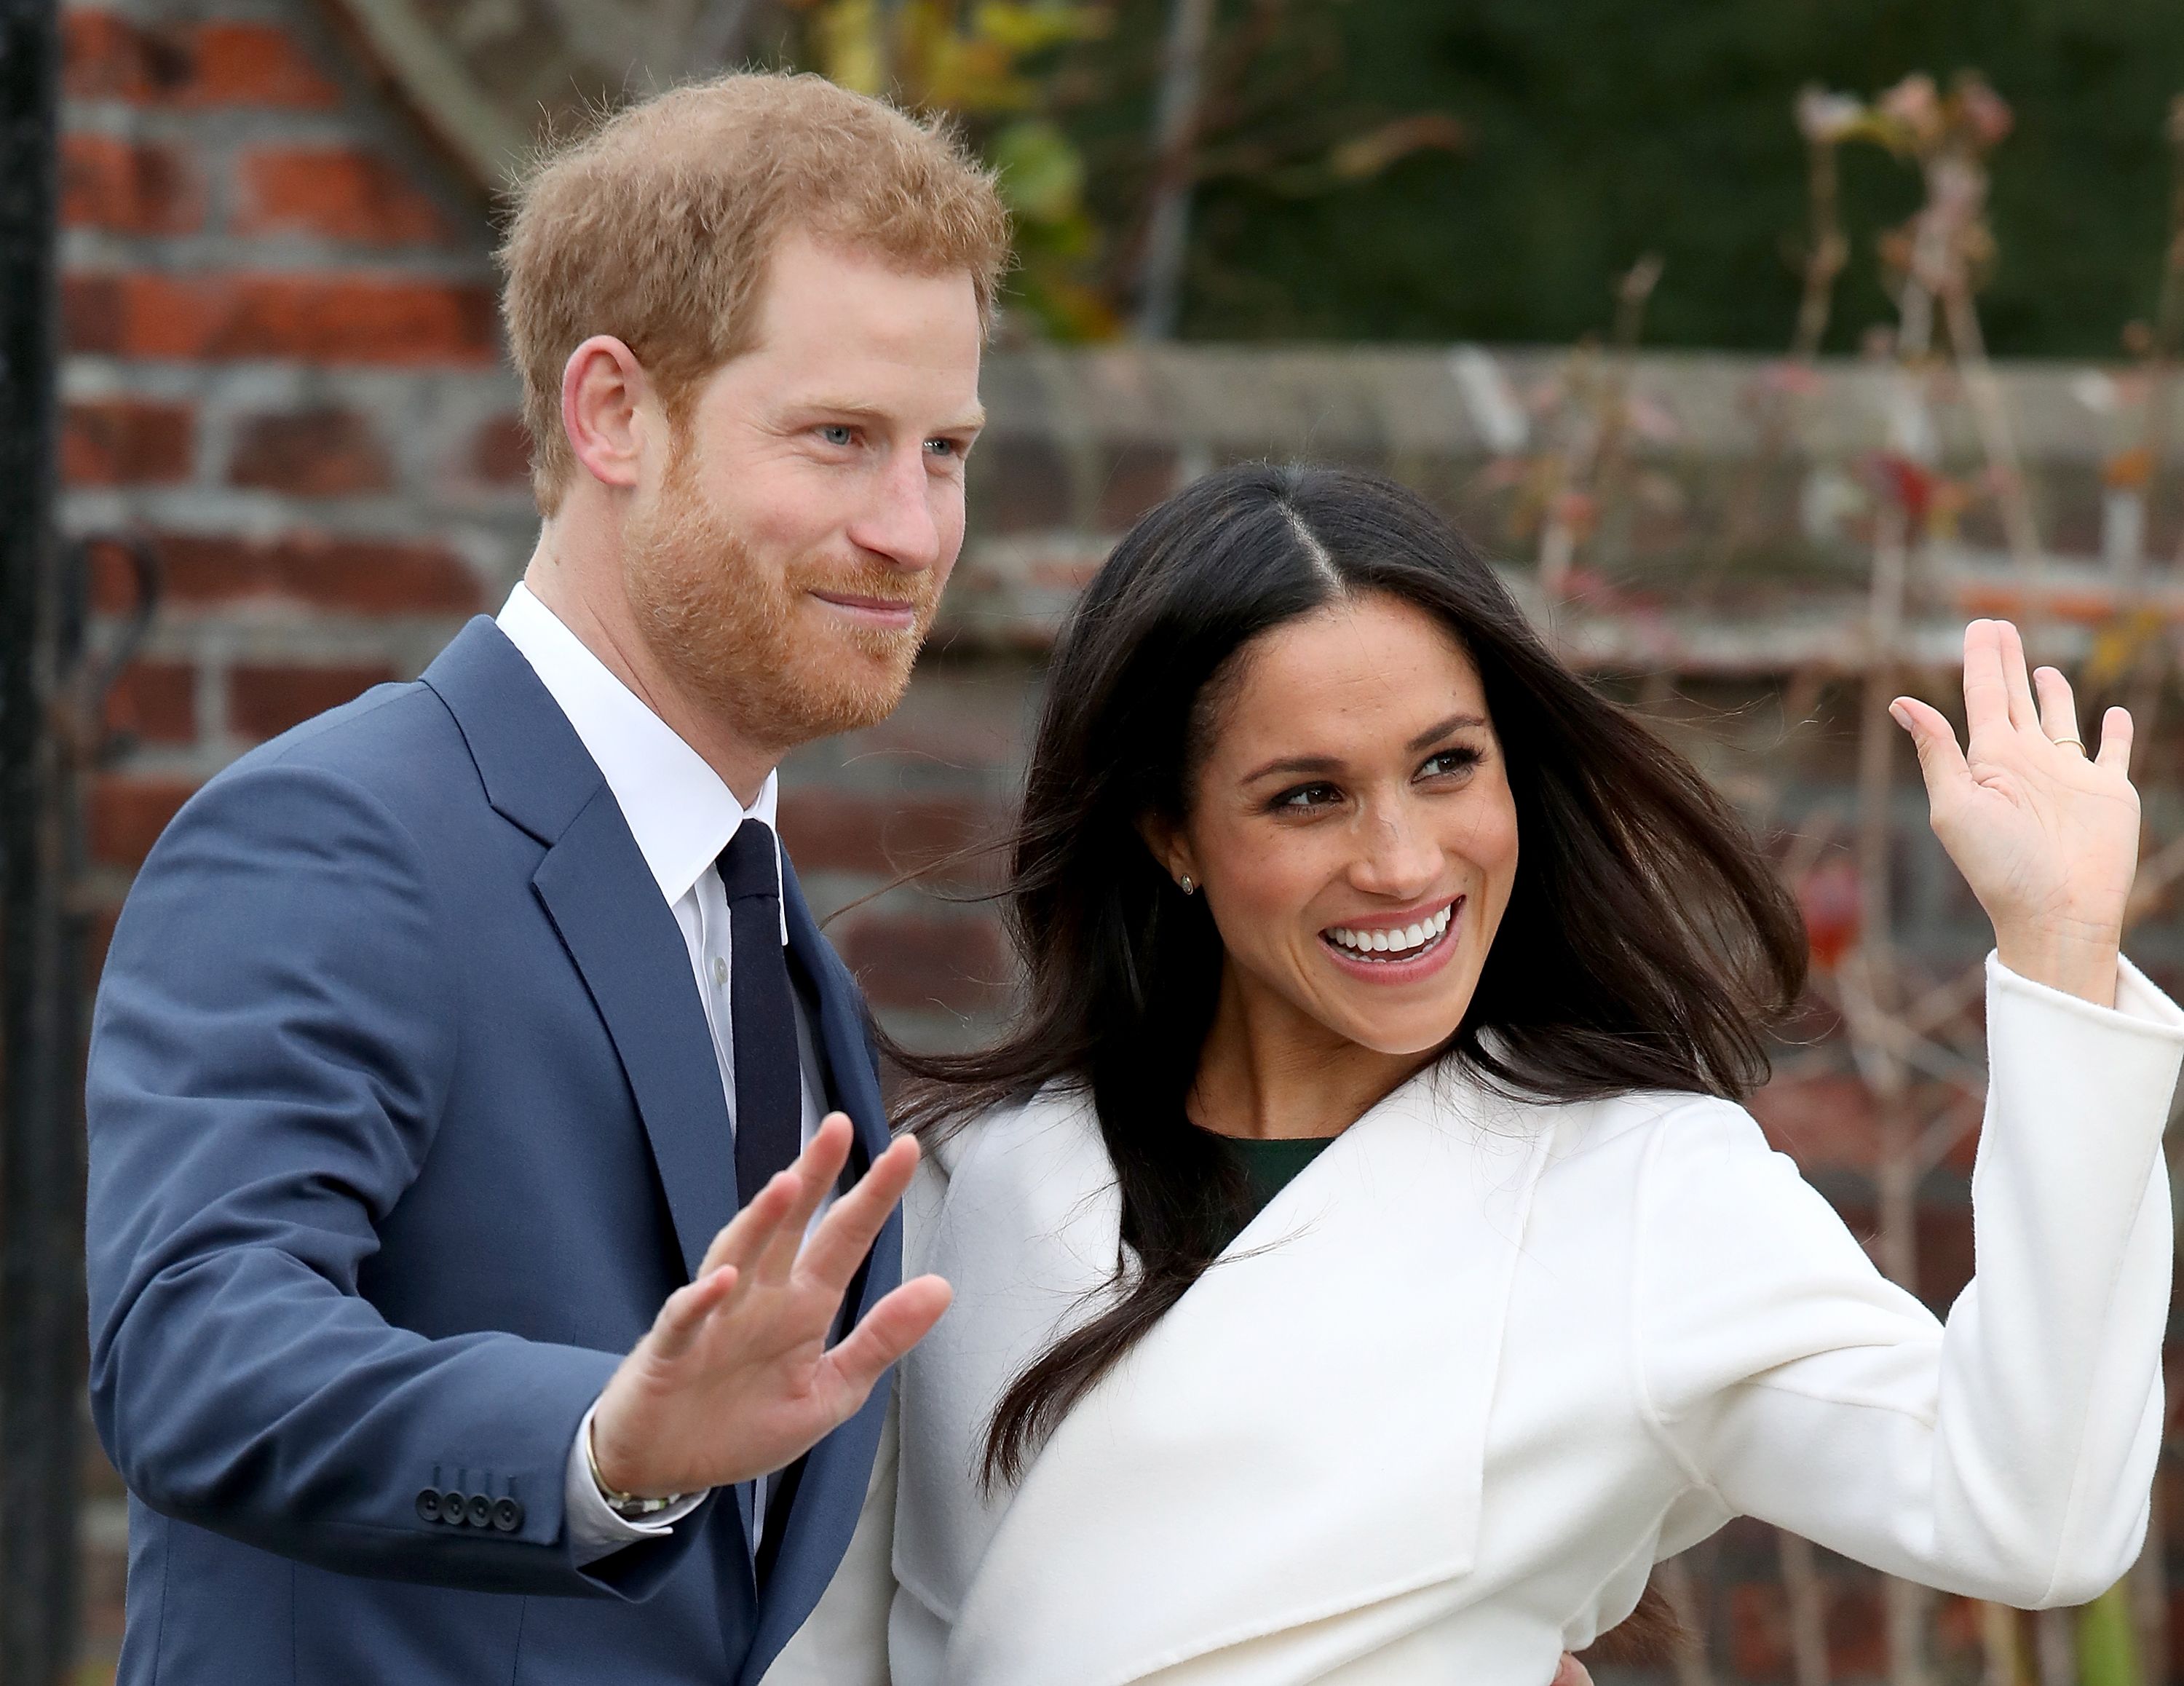 Prince Harry and Meghan Markle announce their engagement at Kensington Palace on November 27, 2017, in London, England | Photo: Chris Jackson/Getty Images